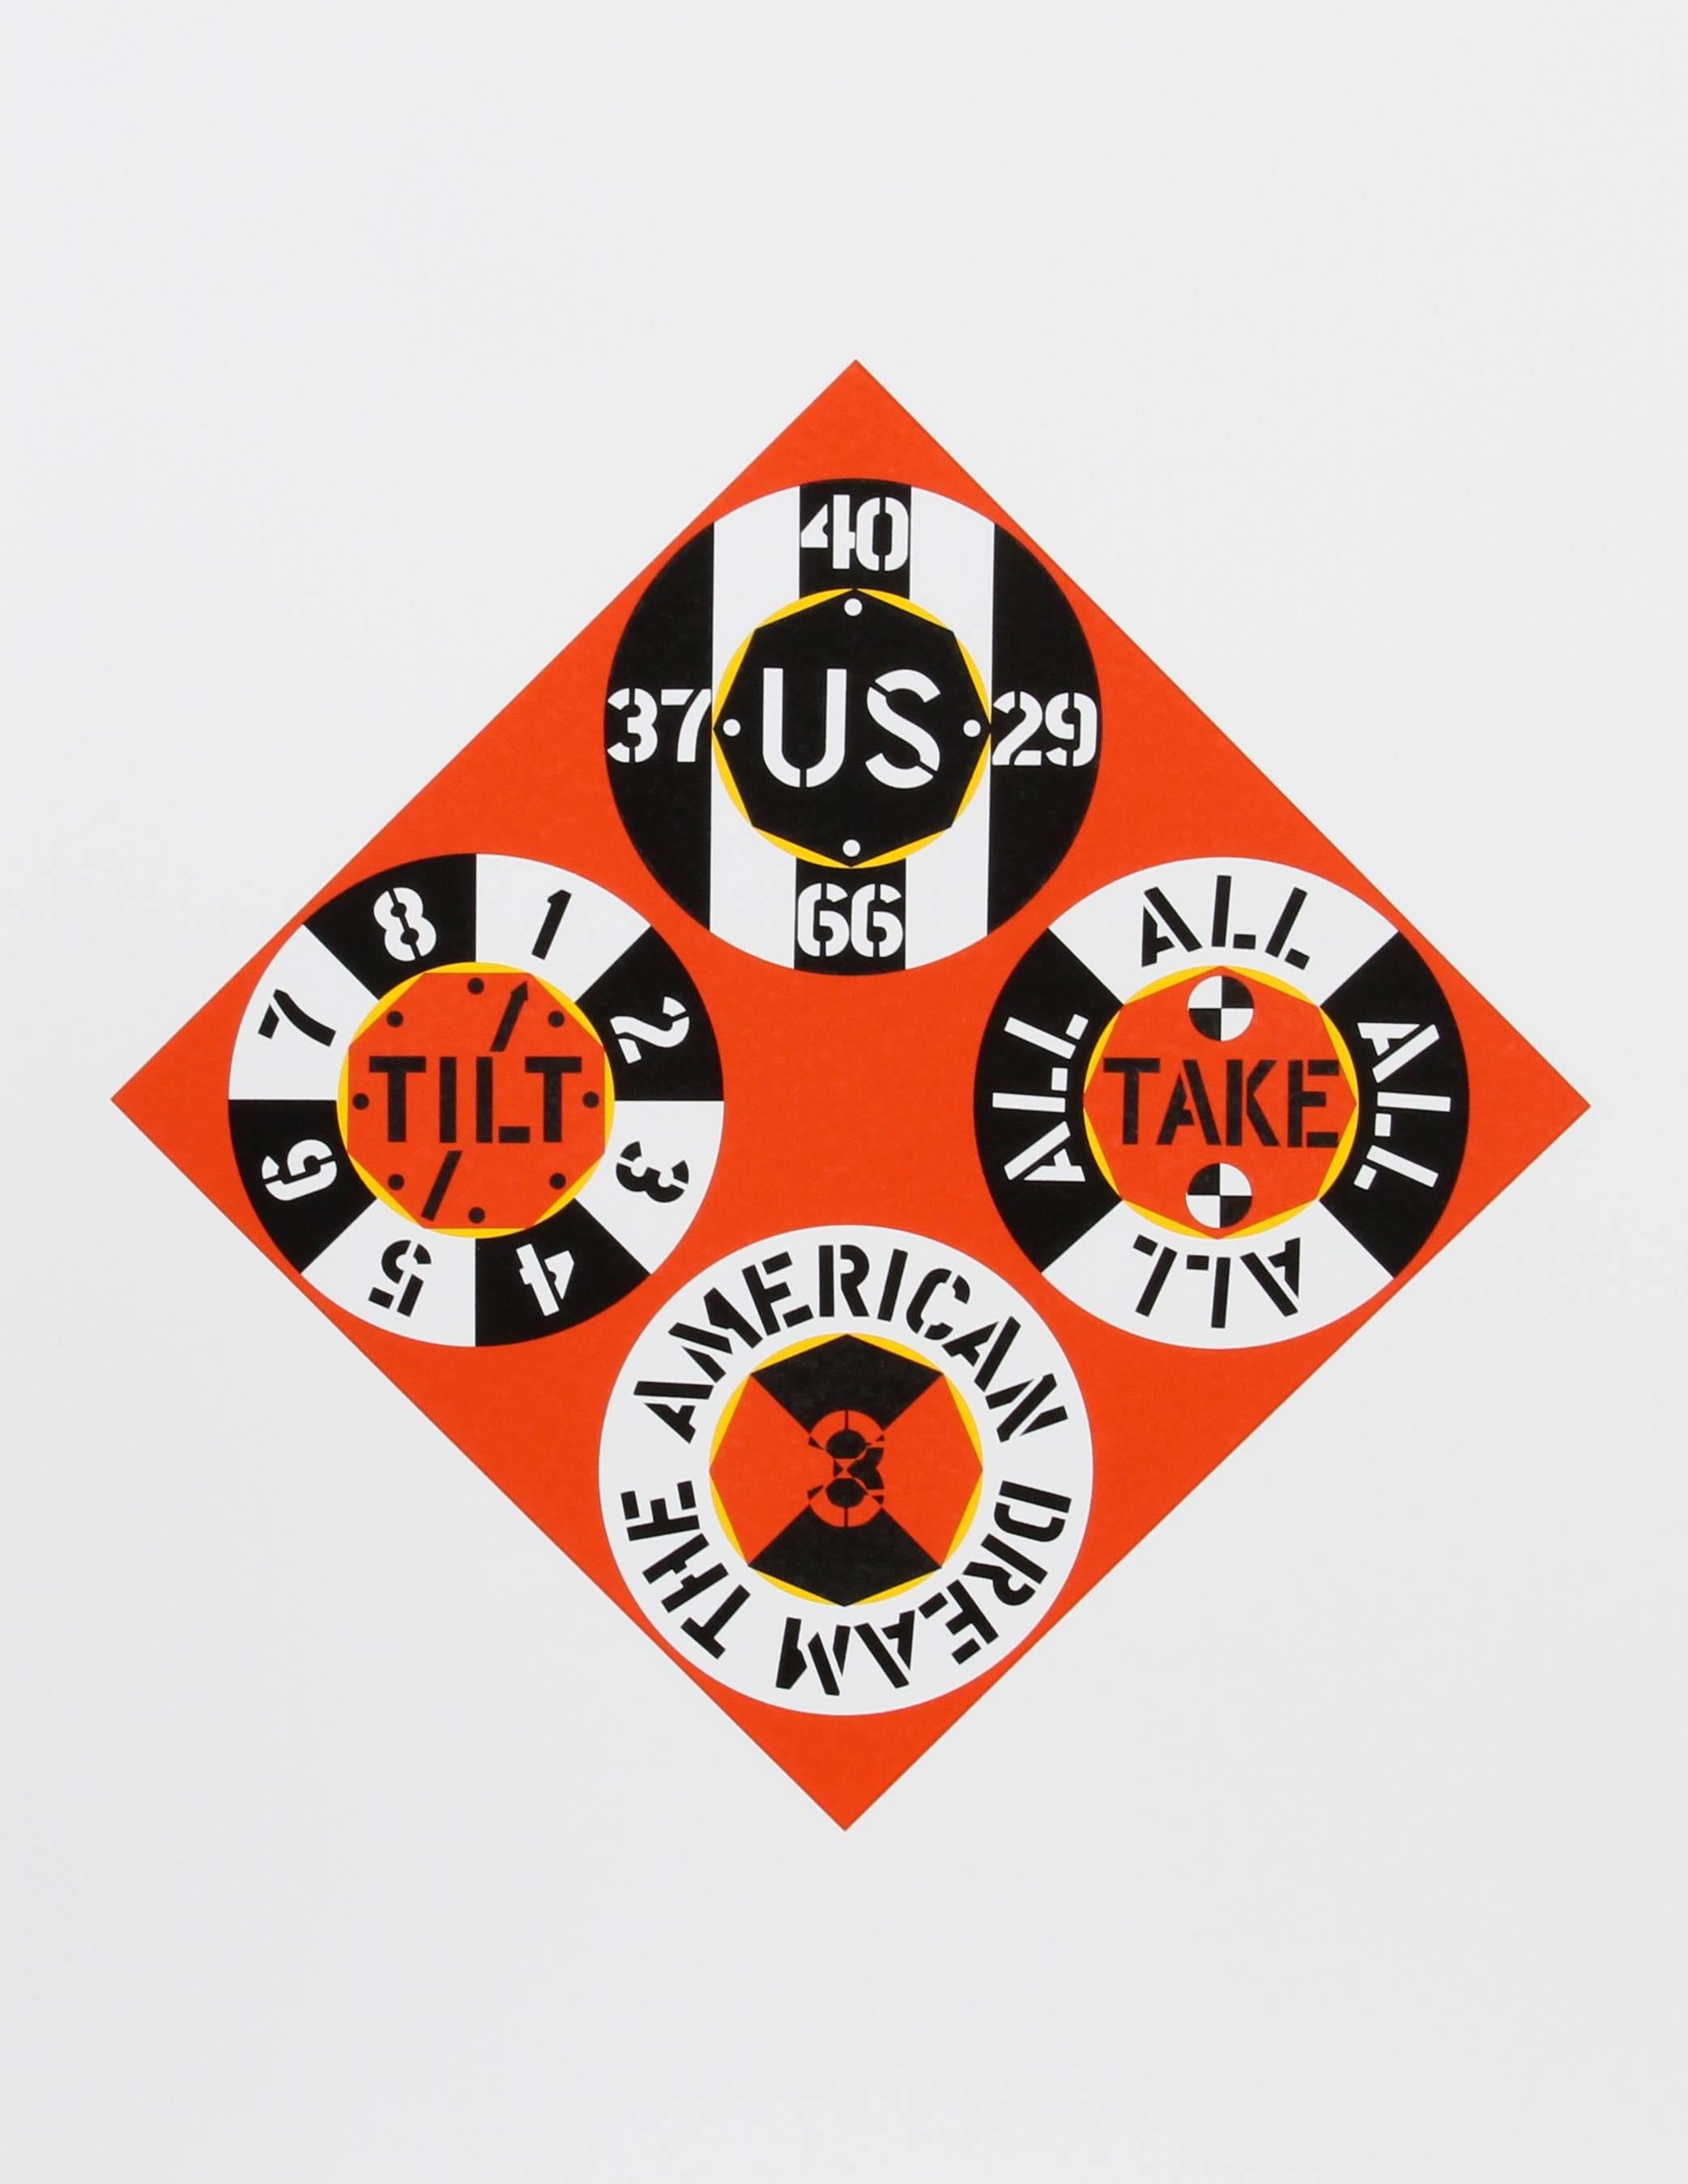 Artist: Robert Indiana, American (1928 - 2018)
Title: Red Diamond from the American Dream Portfolio
Year: 1962 (1997)
Medium: Serigraph
Edition: 395
Image Size: 14 x 14 inches
Size: 22 in. x 17 in. (55.88 cm x 43.18 cm)

Printed and Published by MFA